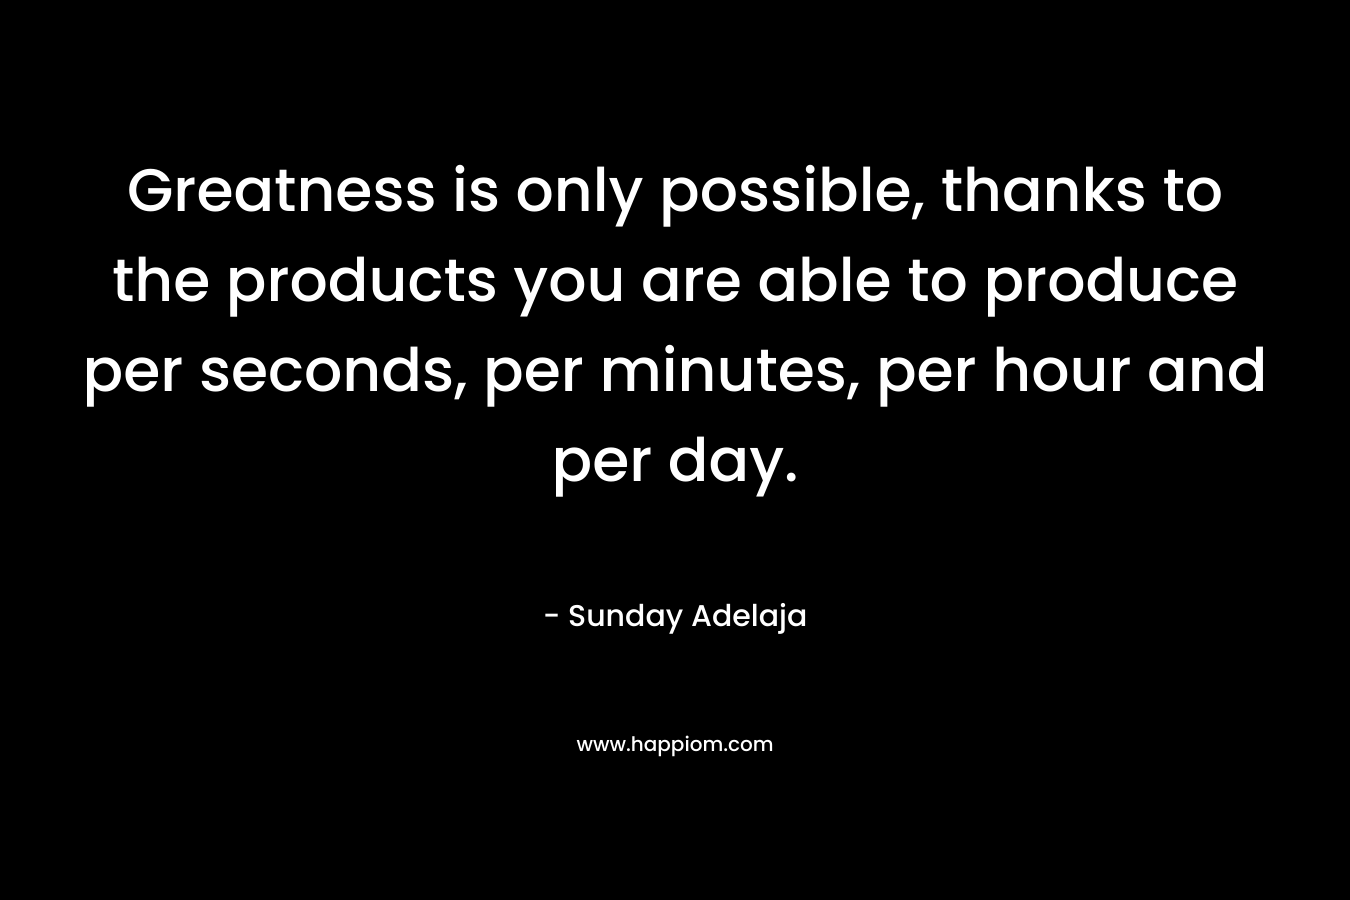 Greatness is only possible, thanks to the products you are able to produce per seconds, per minutes, per hour and per day.